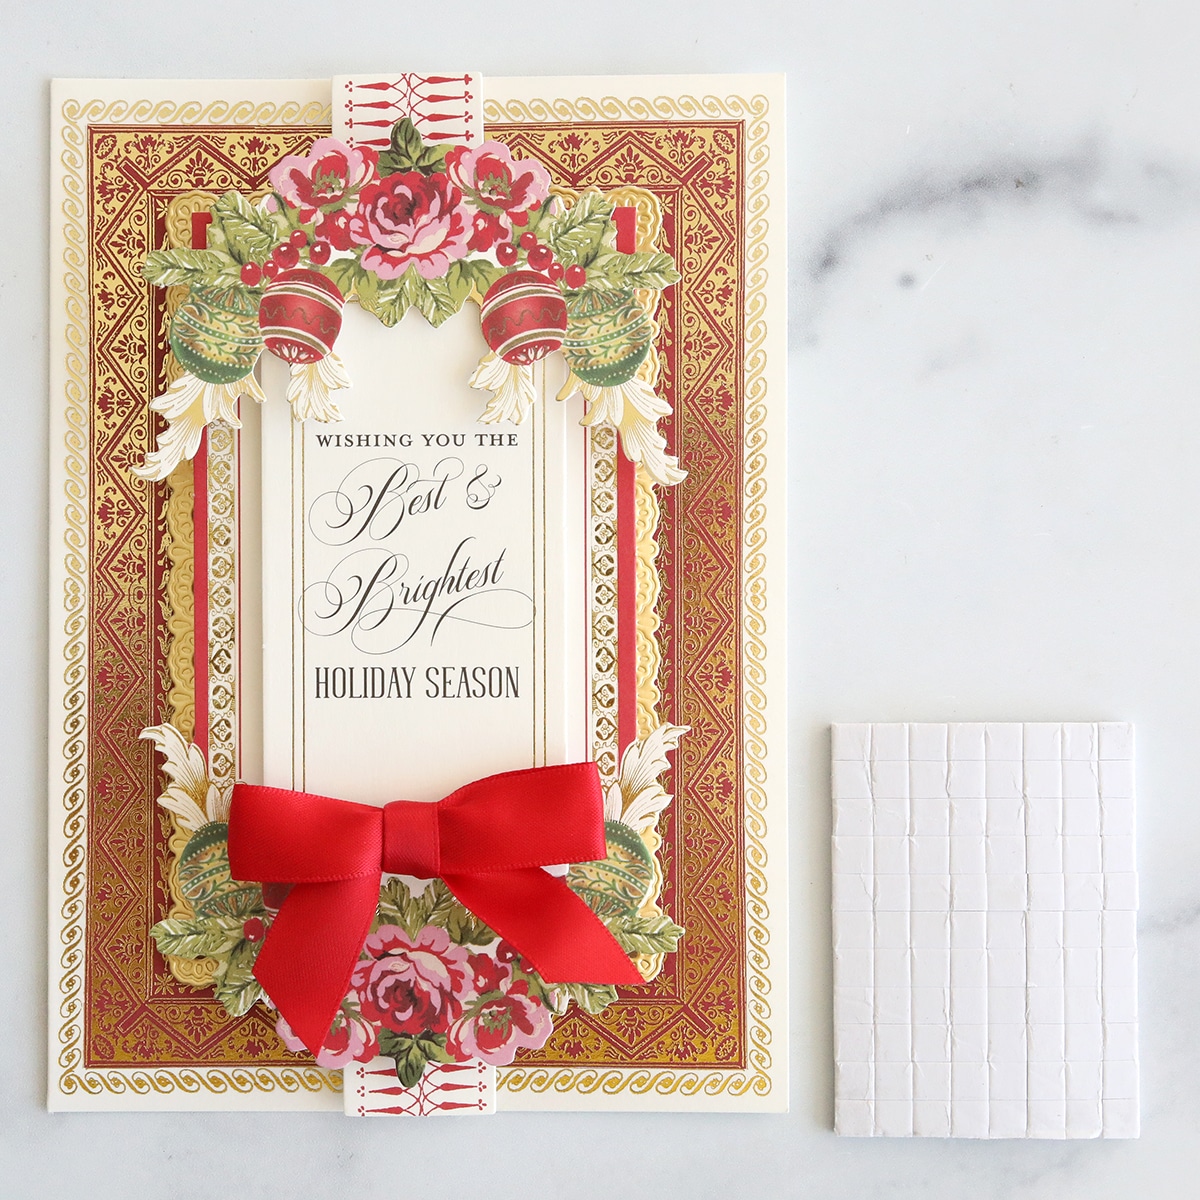 A card with a red bow and a red ribbon.